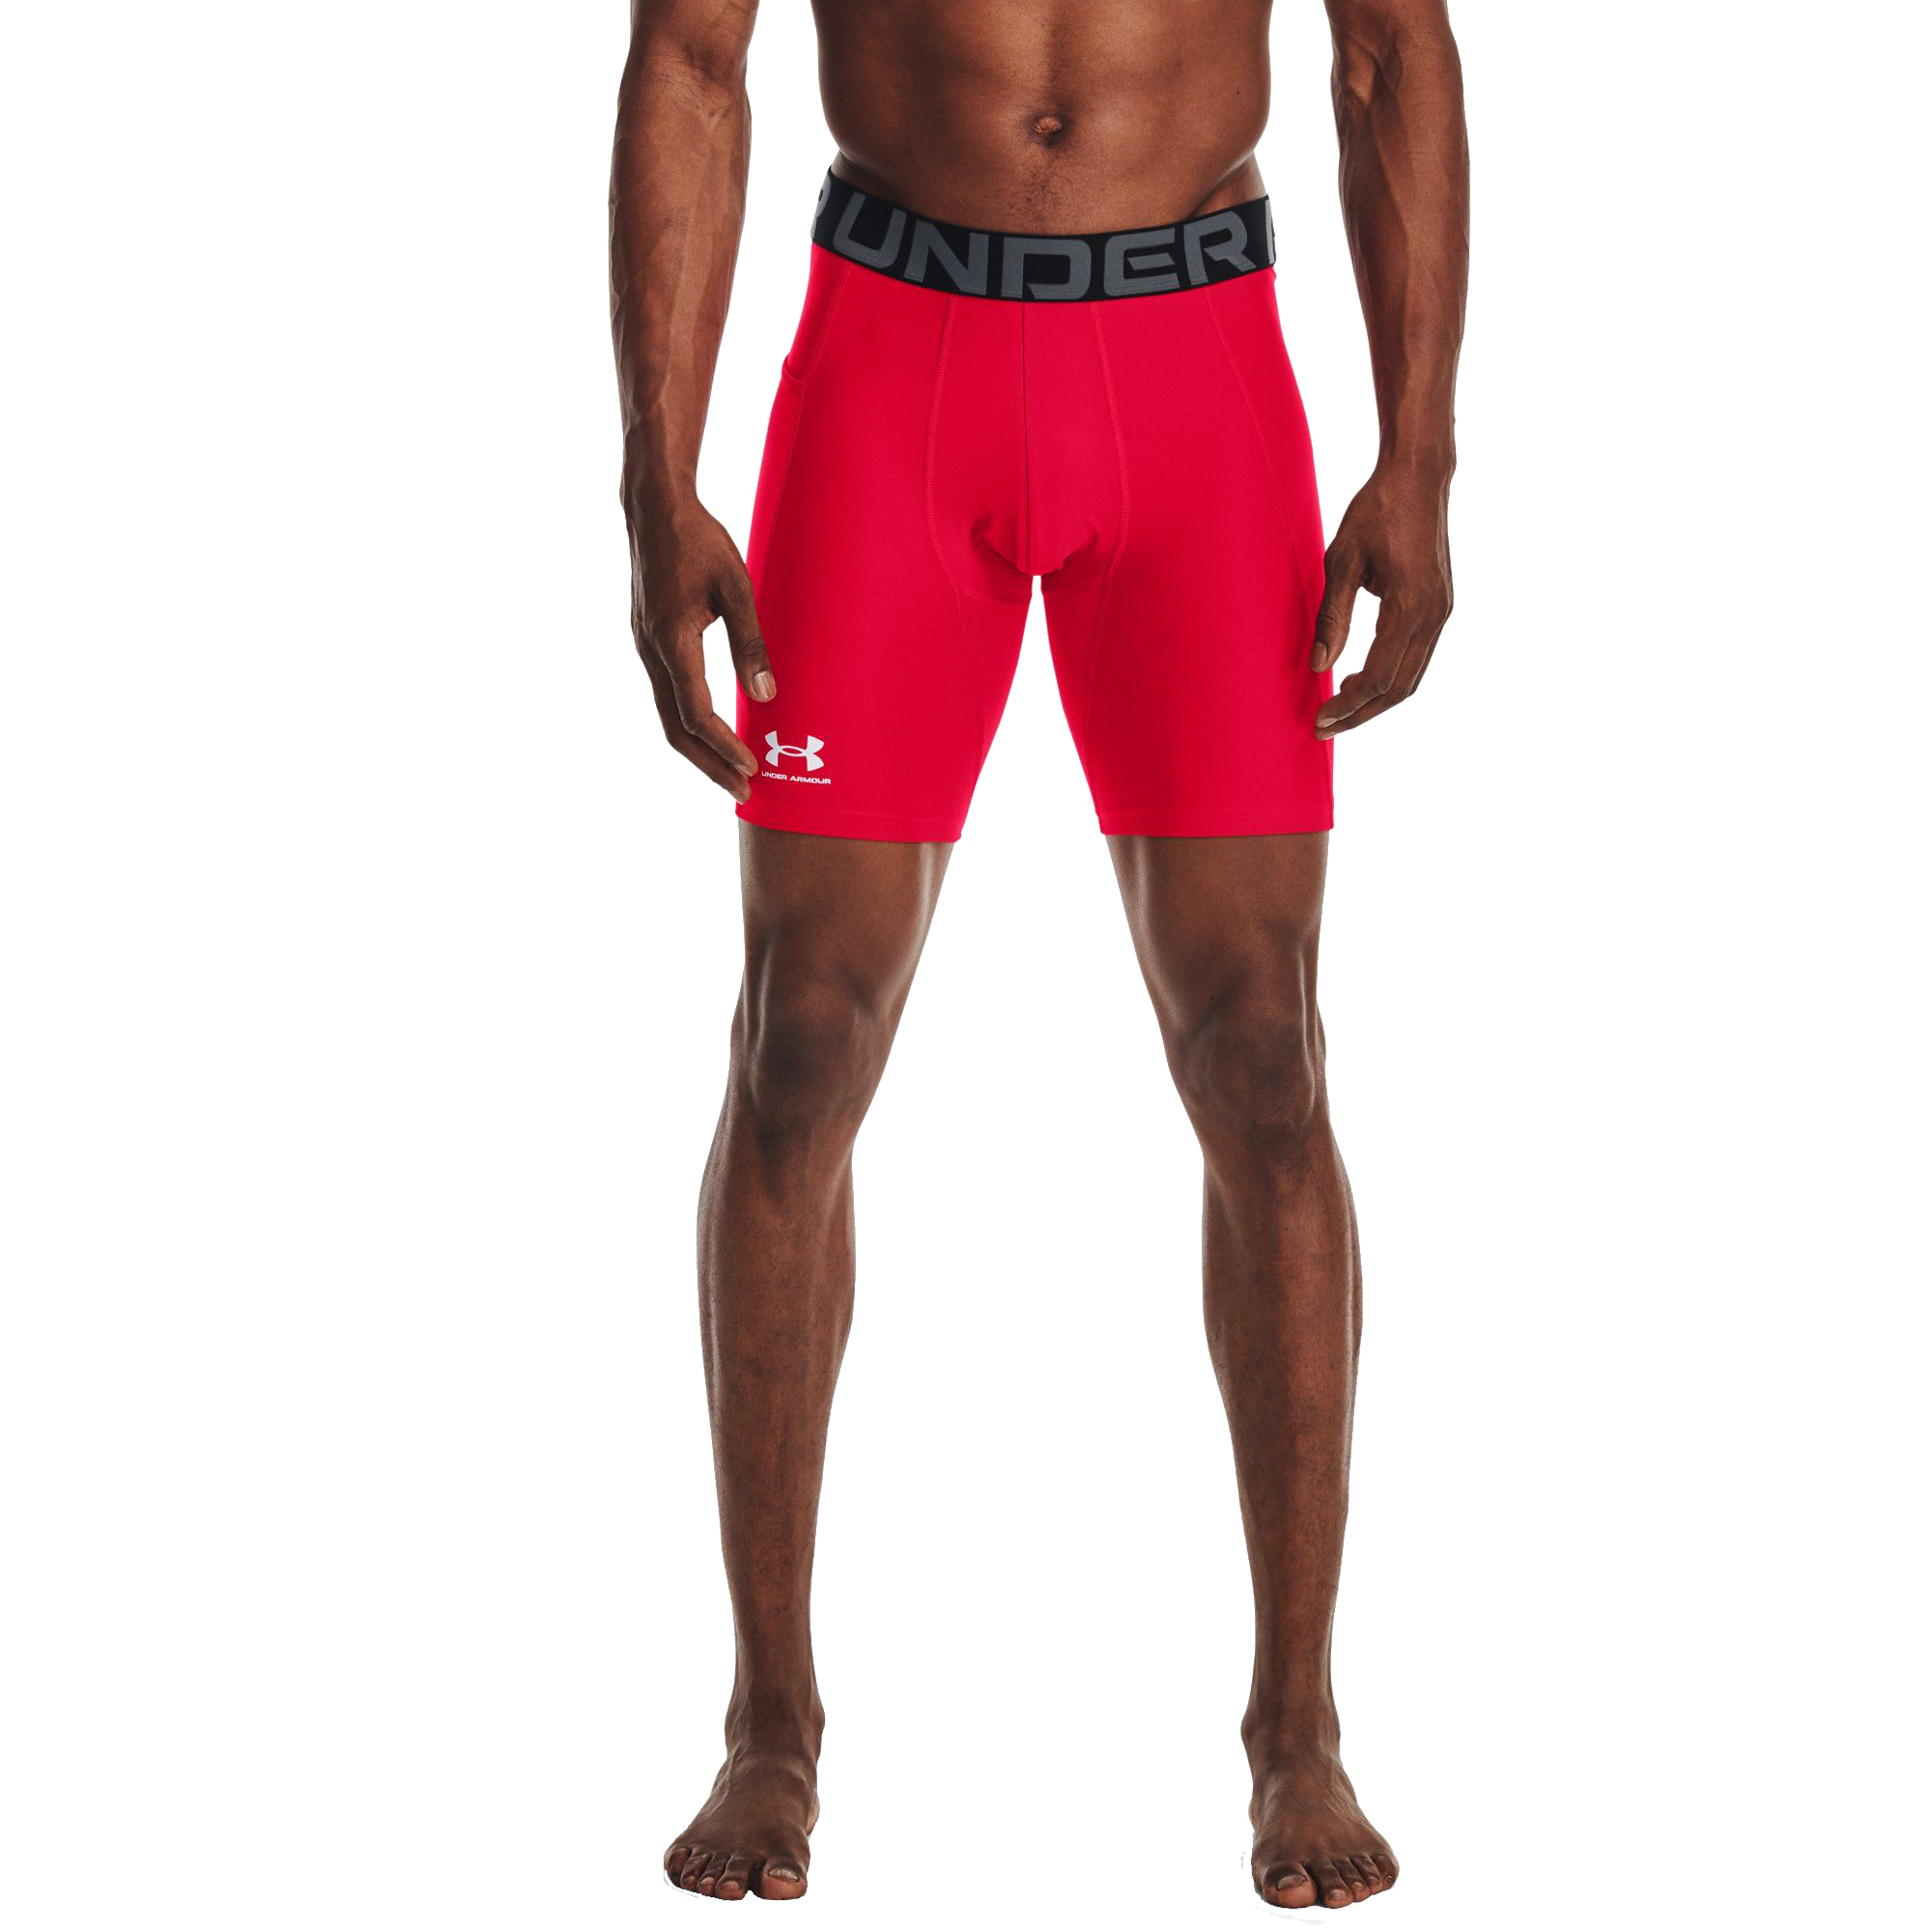 Under Armour HeatGear Armour Compression Shorts for Men - Red/White - 4XLT